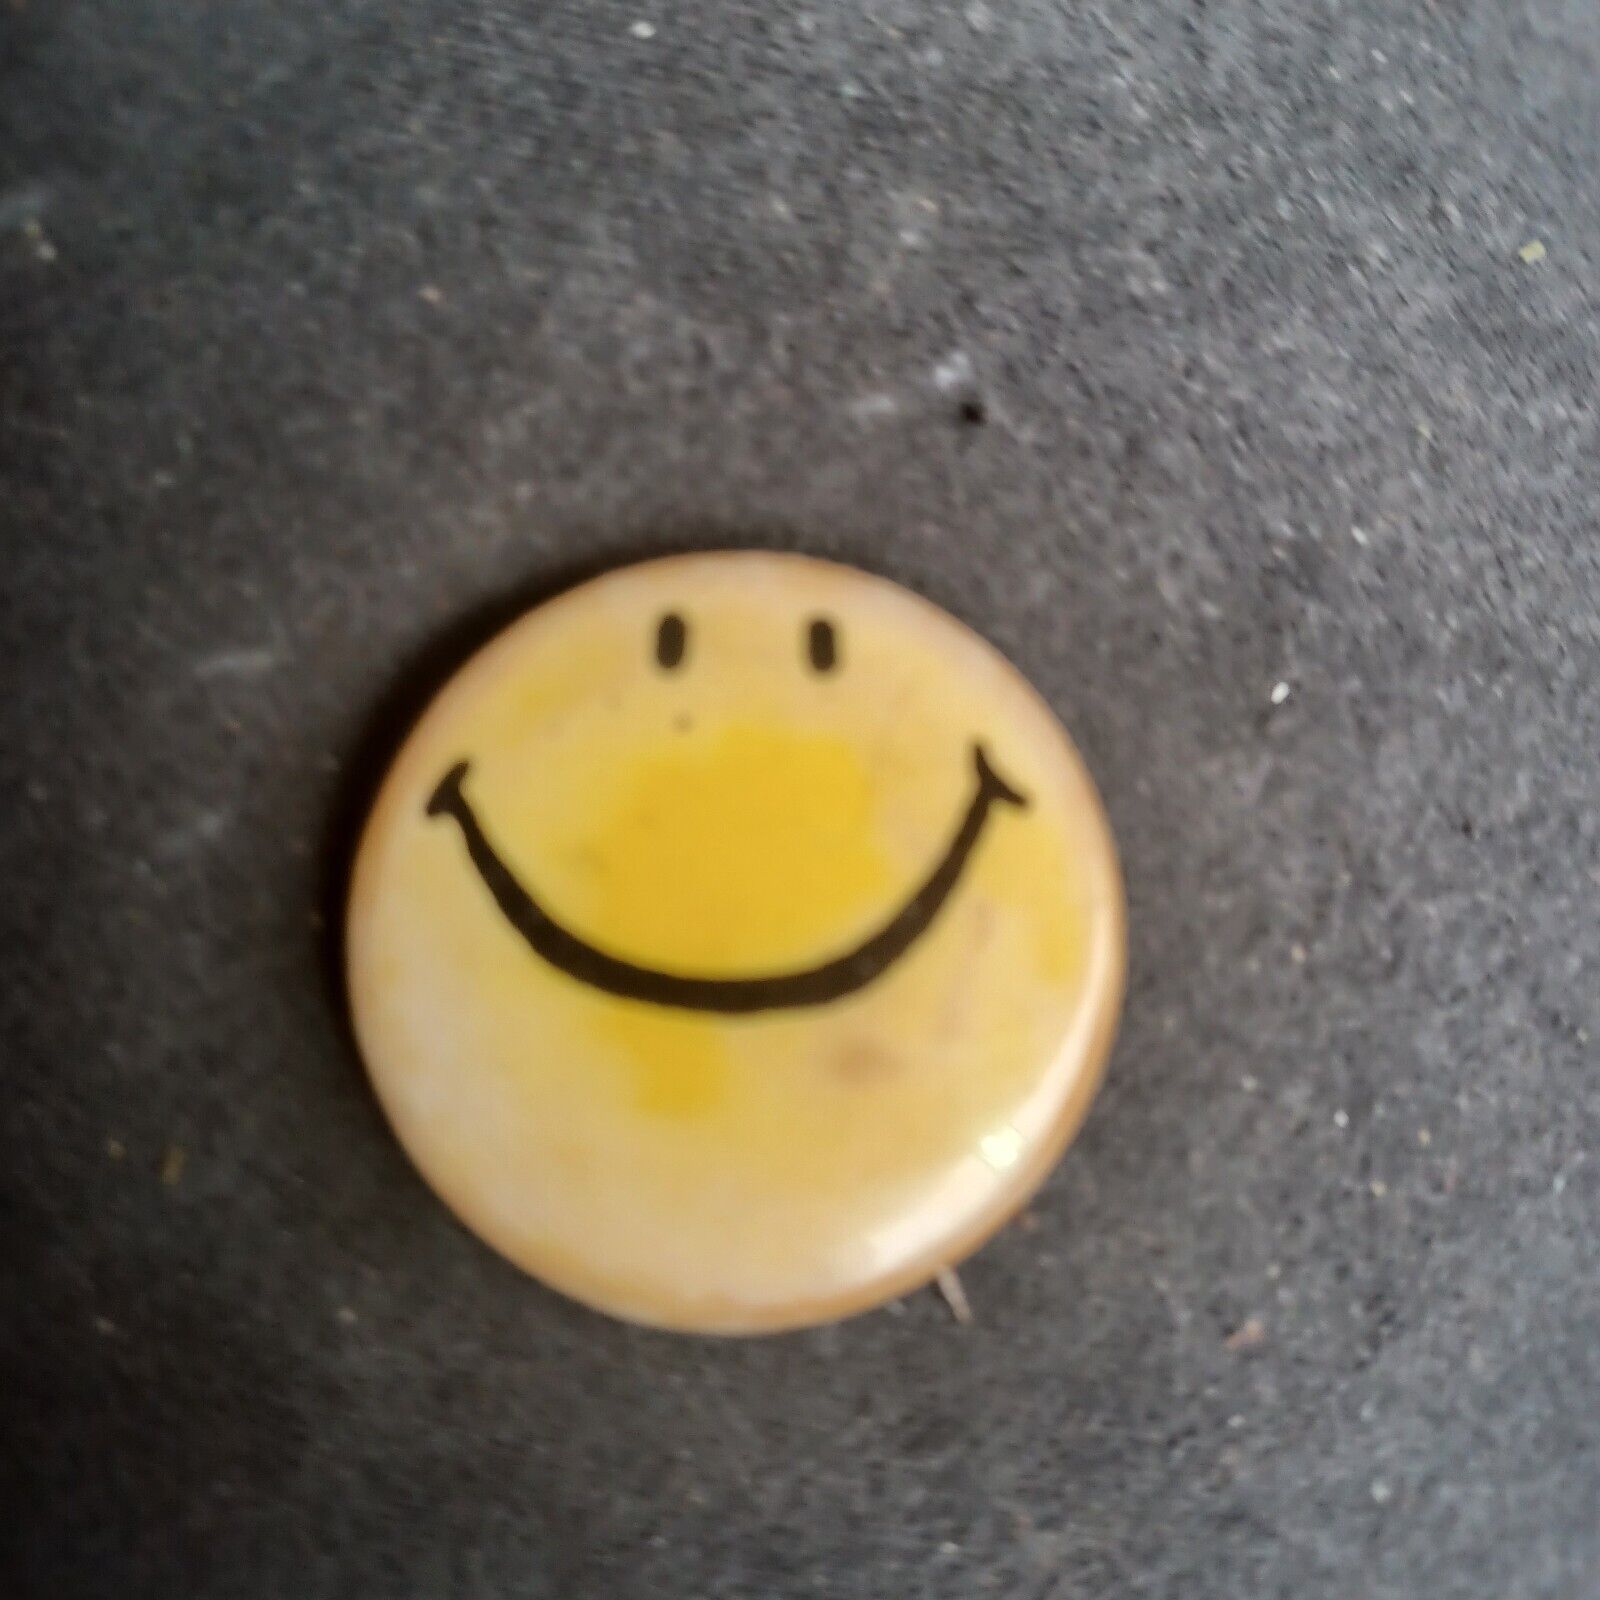 VINTAGE HAPPY FACE HAVE A NICE DAY PIN BUTTON ca. 1970s